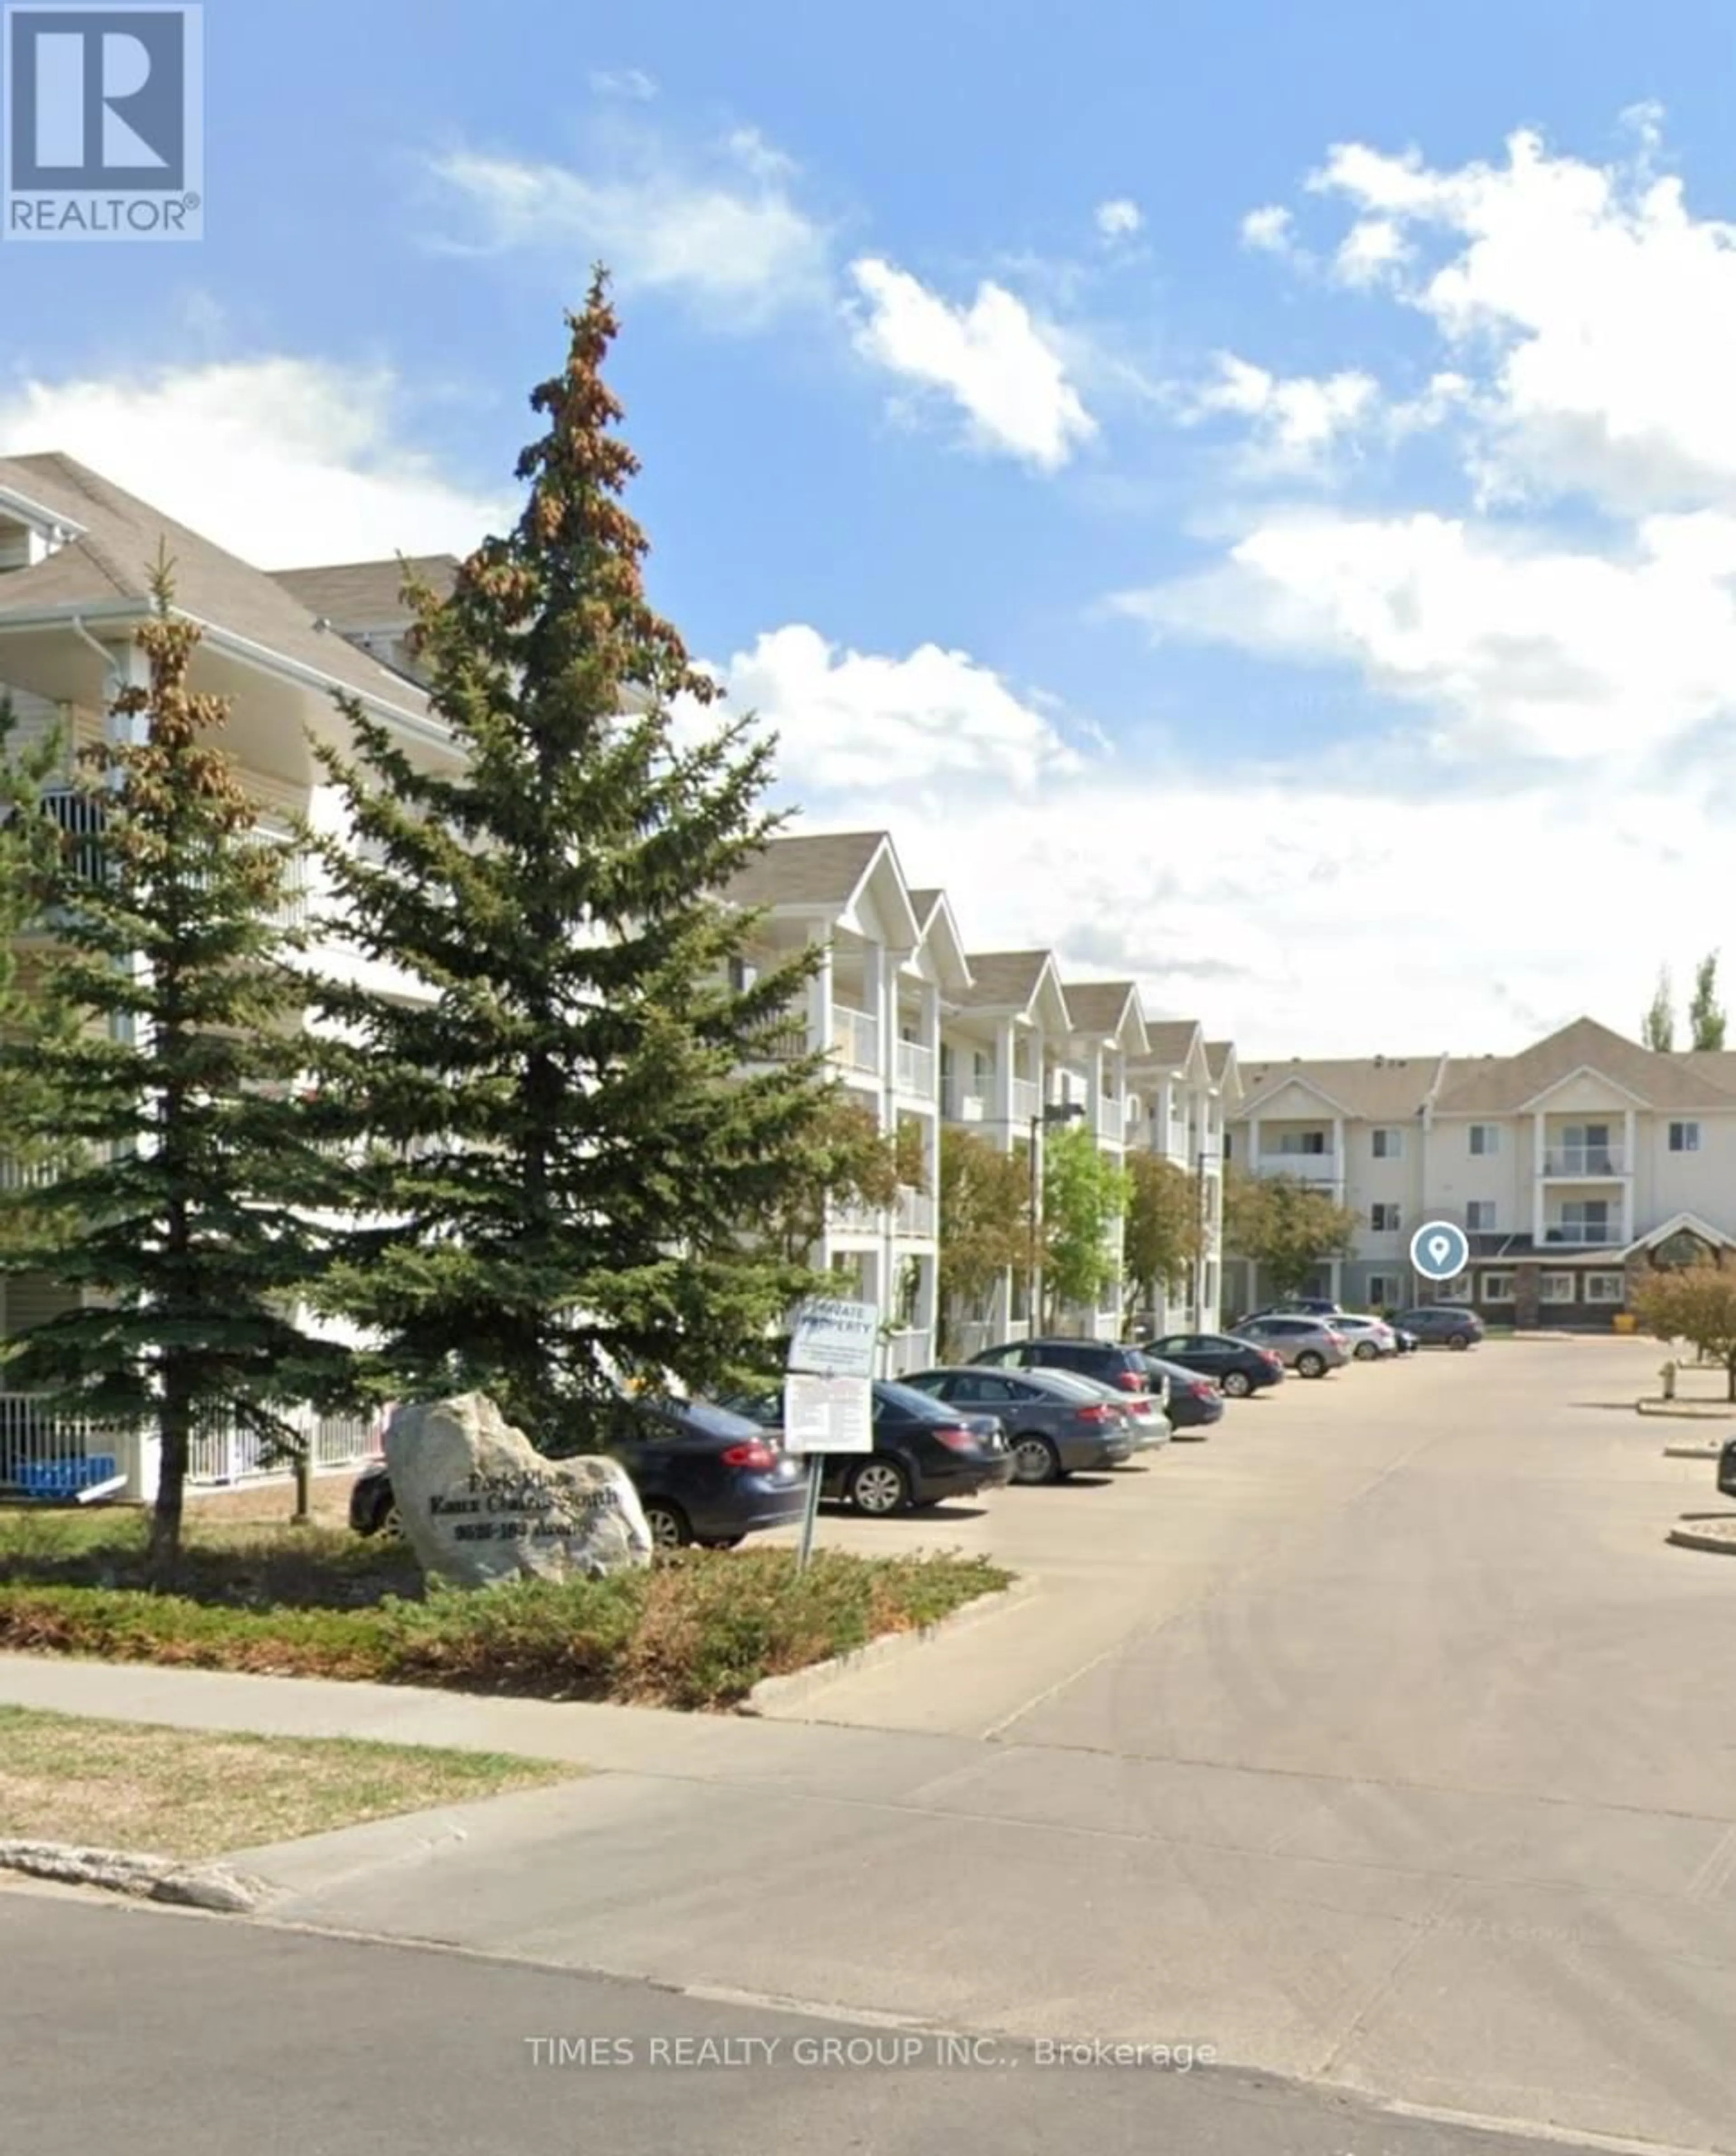 A pic from exterior of the house or condo for #322 -9525 162 AVE NW, Edmonton Alberta T5Z3V2